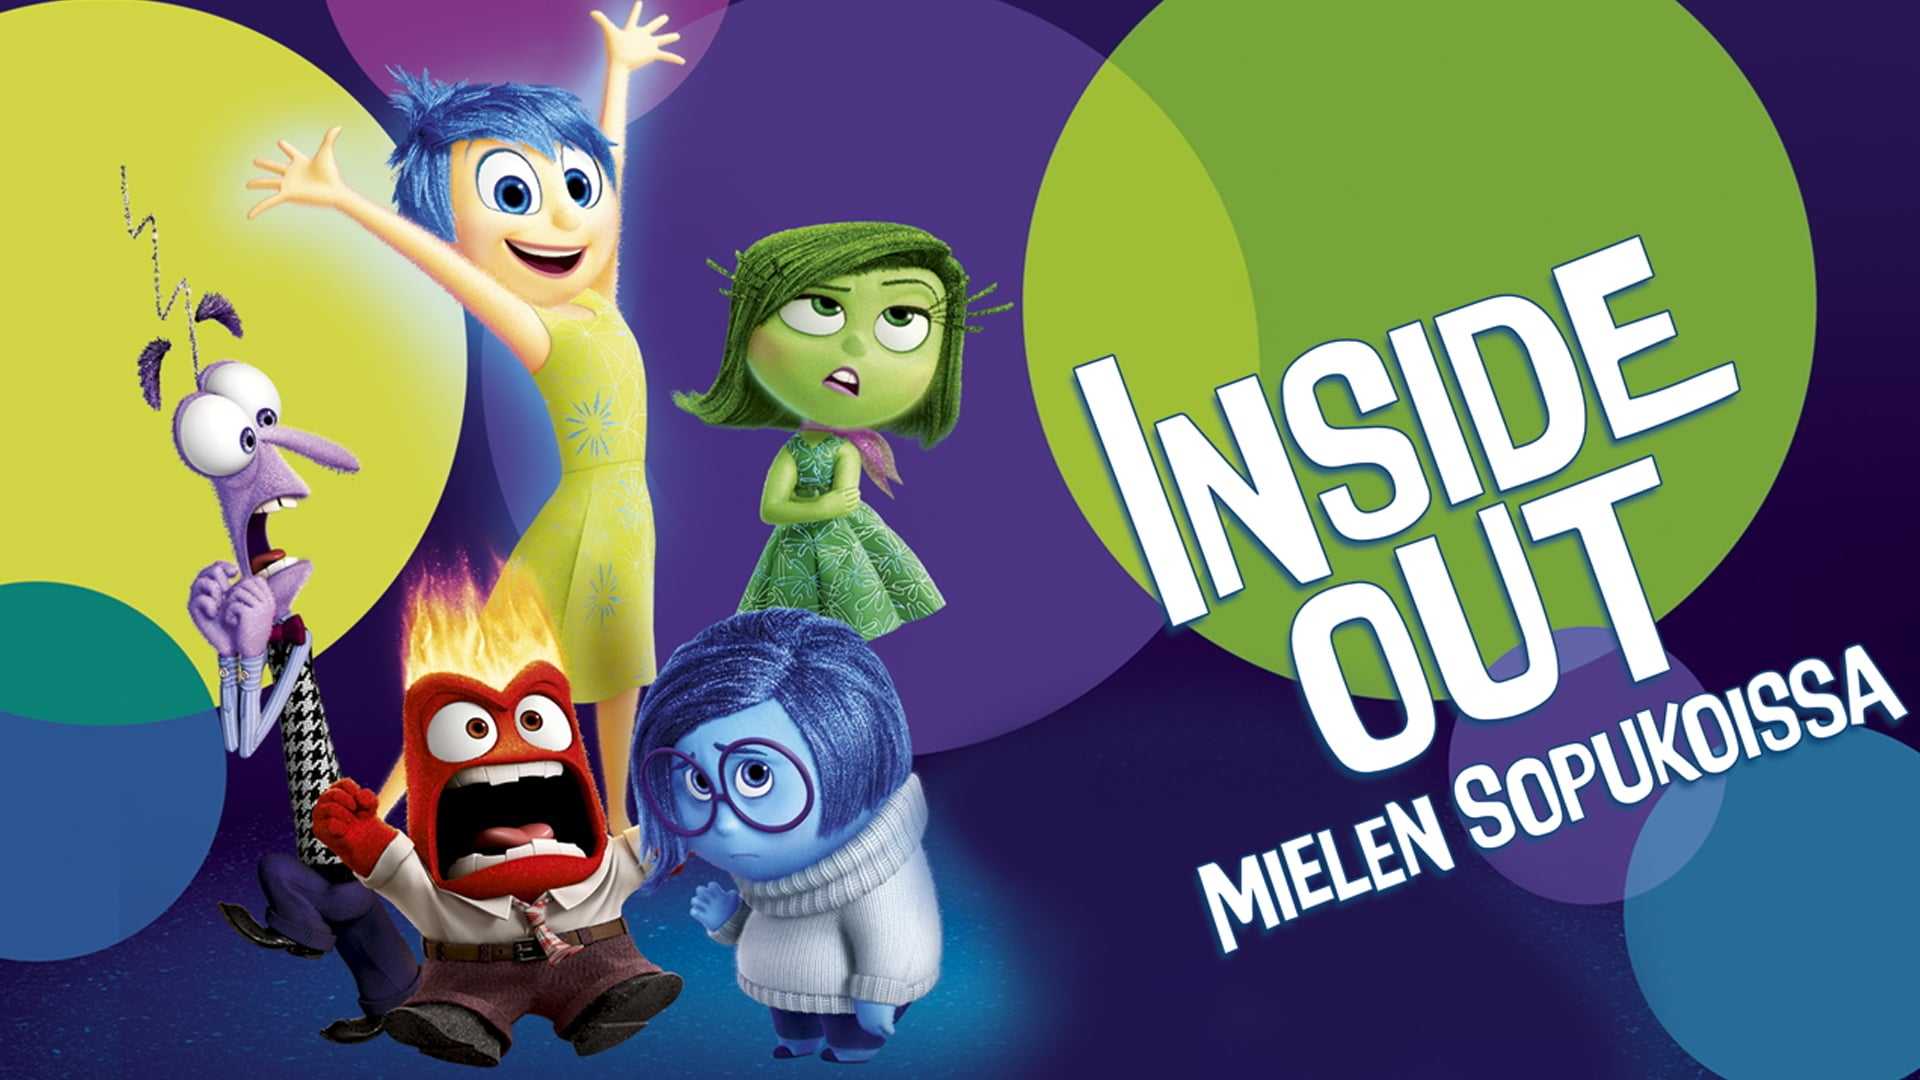 You turn me inside. Inside out 2015 poster. Головоломка. Inside out Постер. Головоломка 2015 Постер.